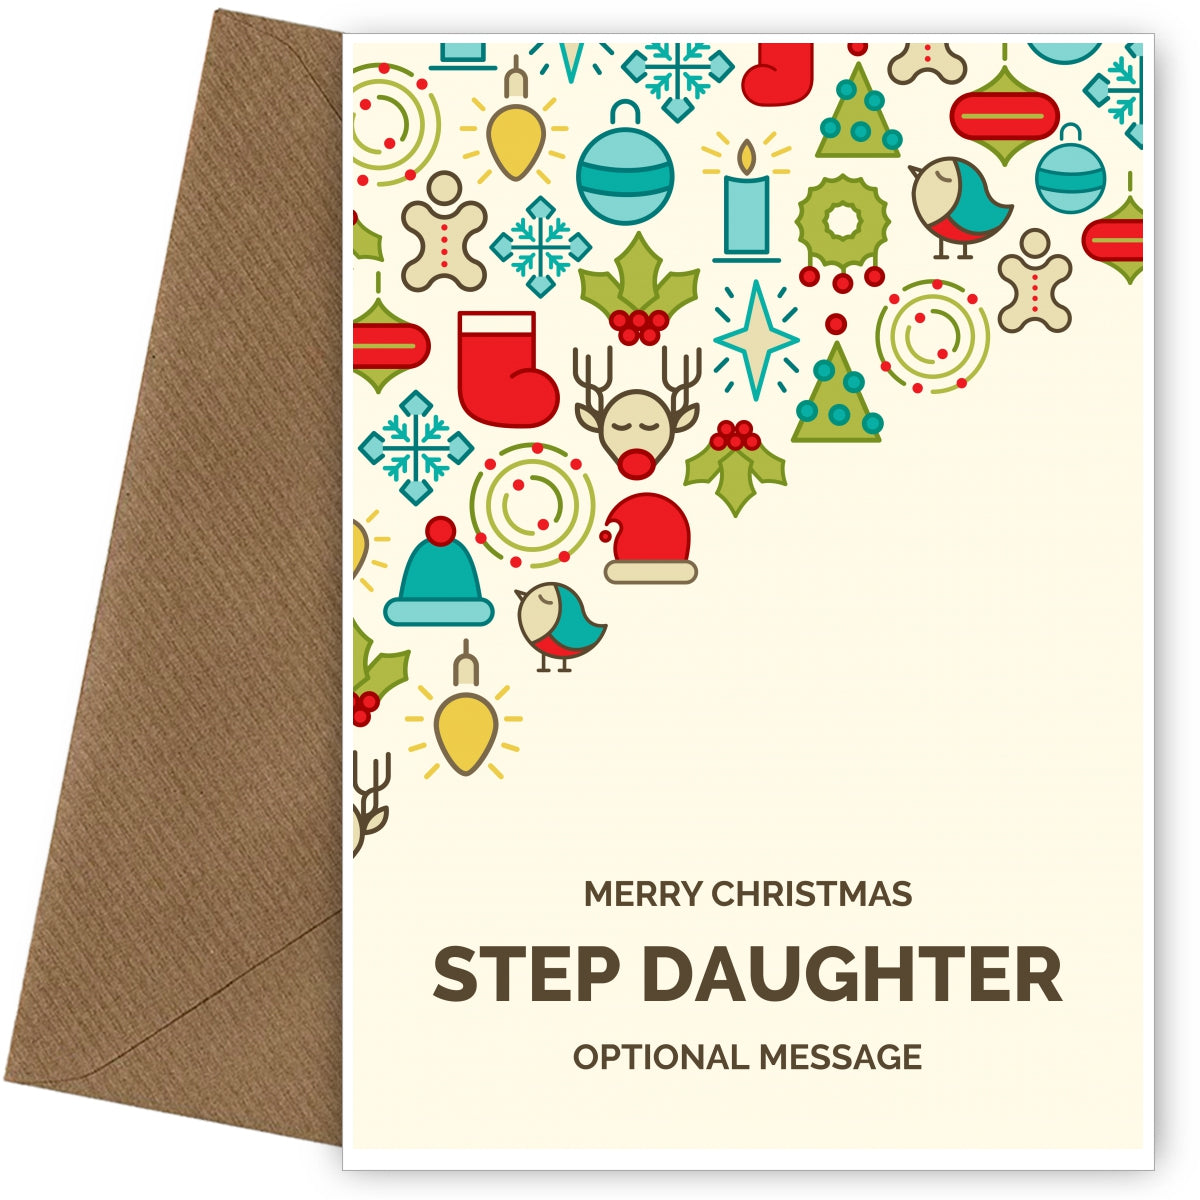 Merry Christmas Card for Step Daughter - Christmas Icons